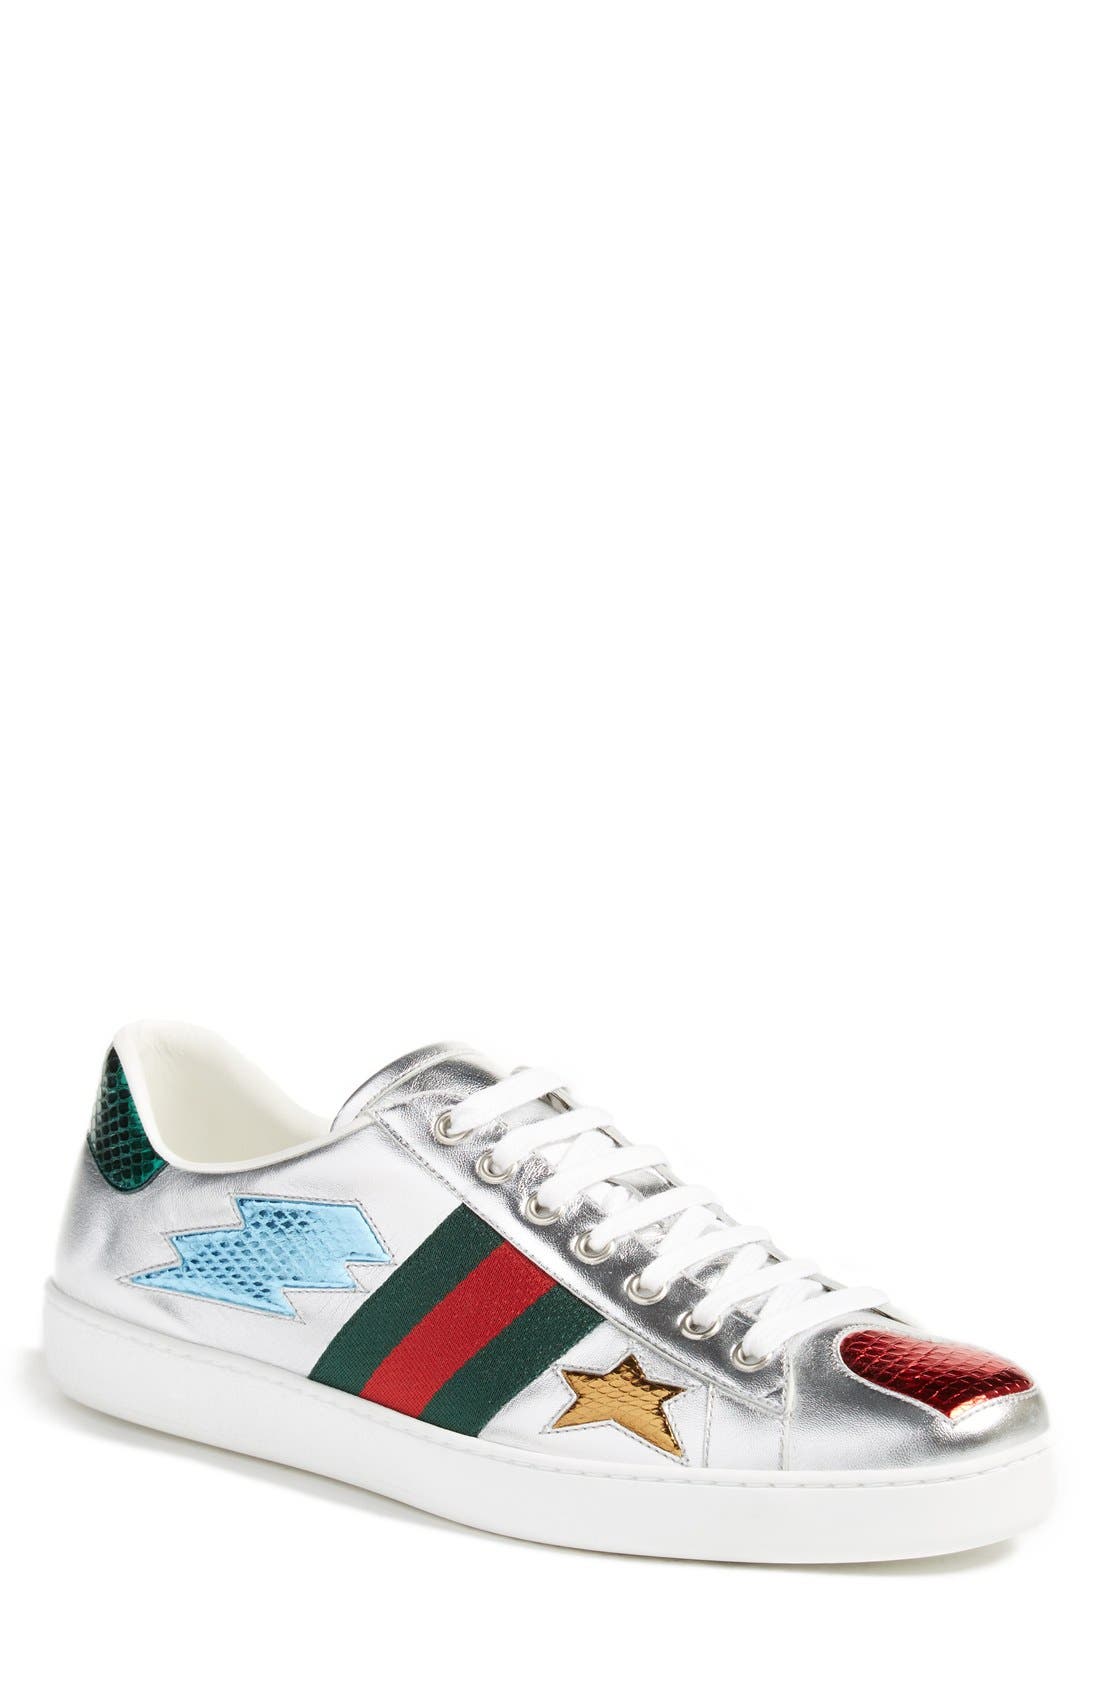 gucci lightning bolt sneakers